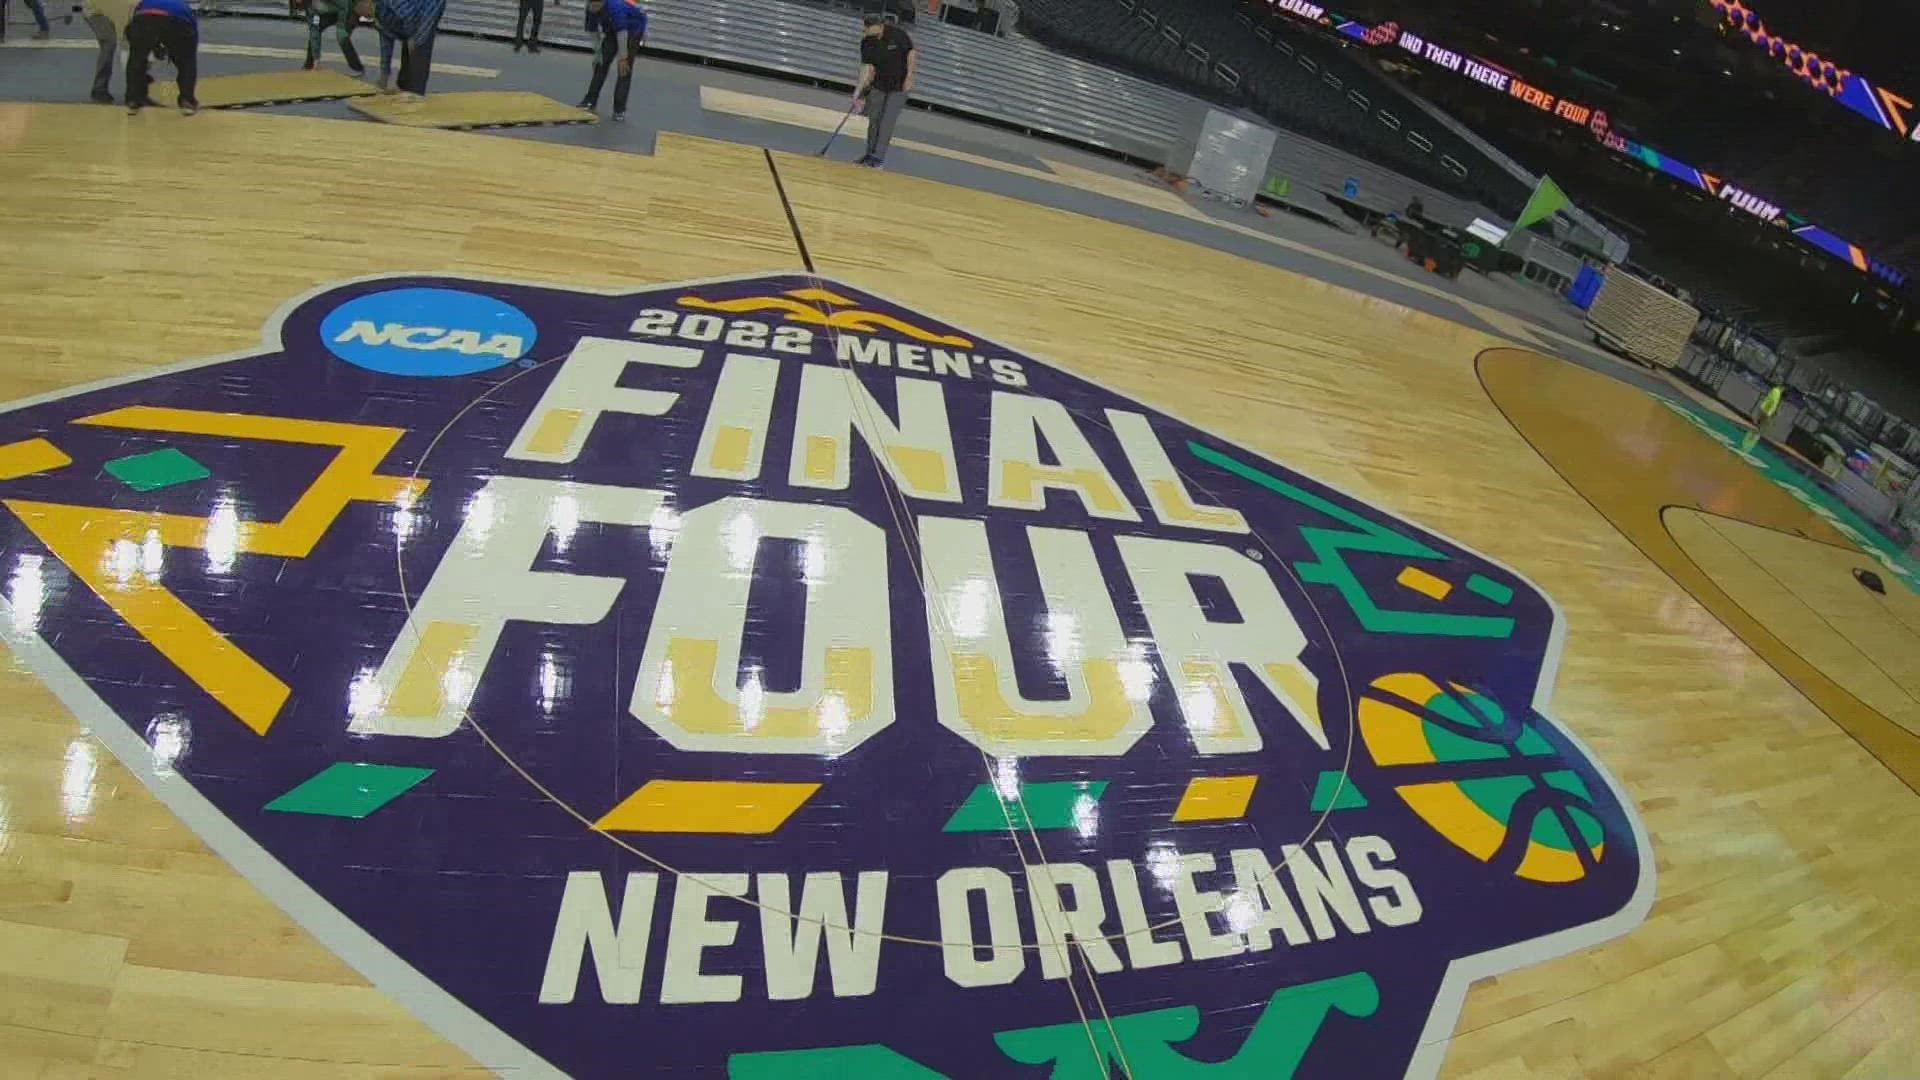 The Scoop with Spoon Final Four New Orleans